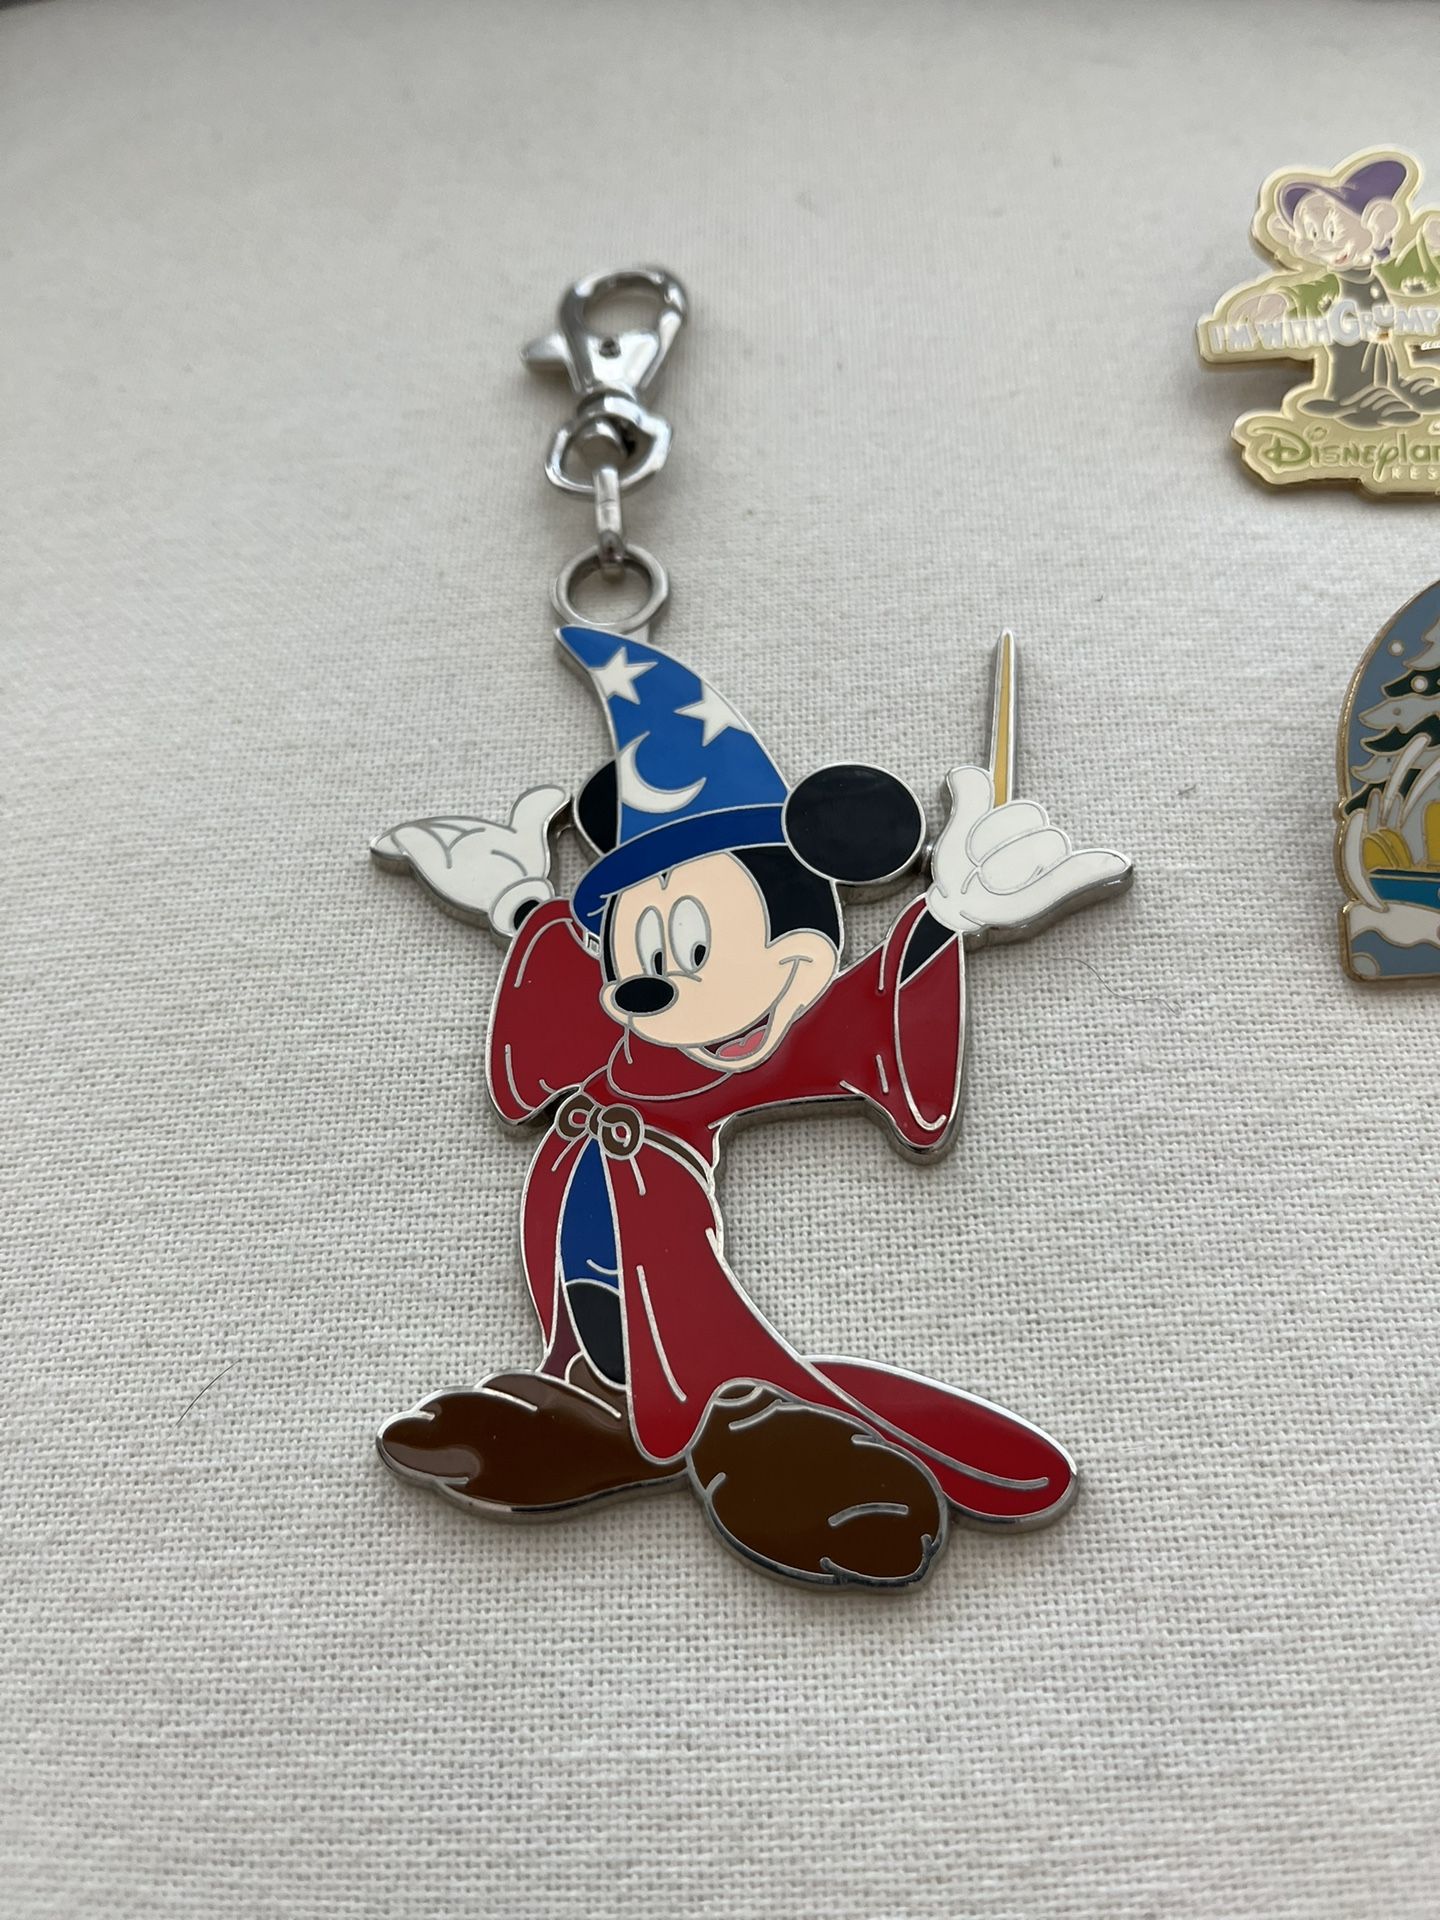 Authentic Disney Trading Pins, Early 2000s